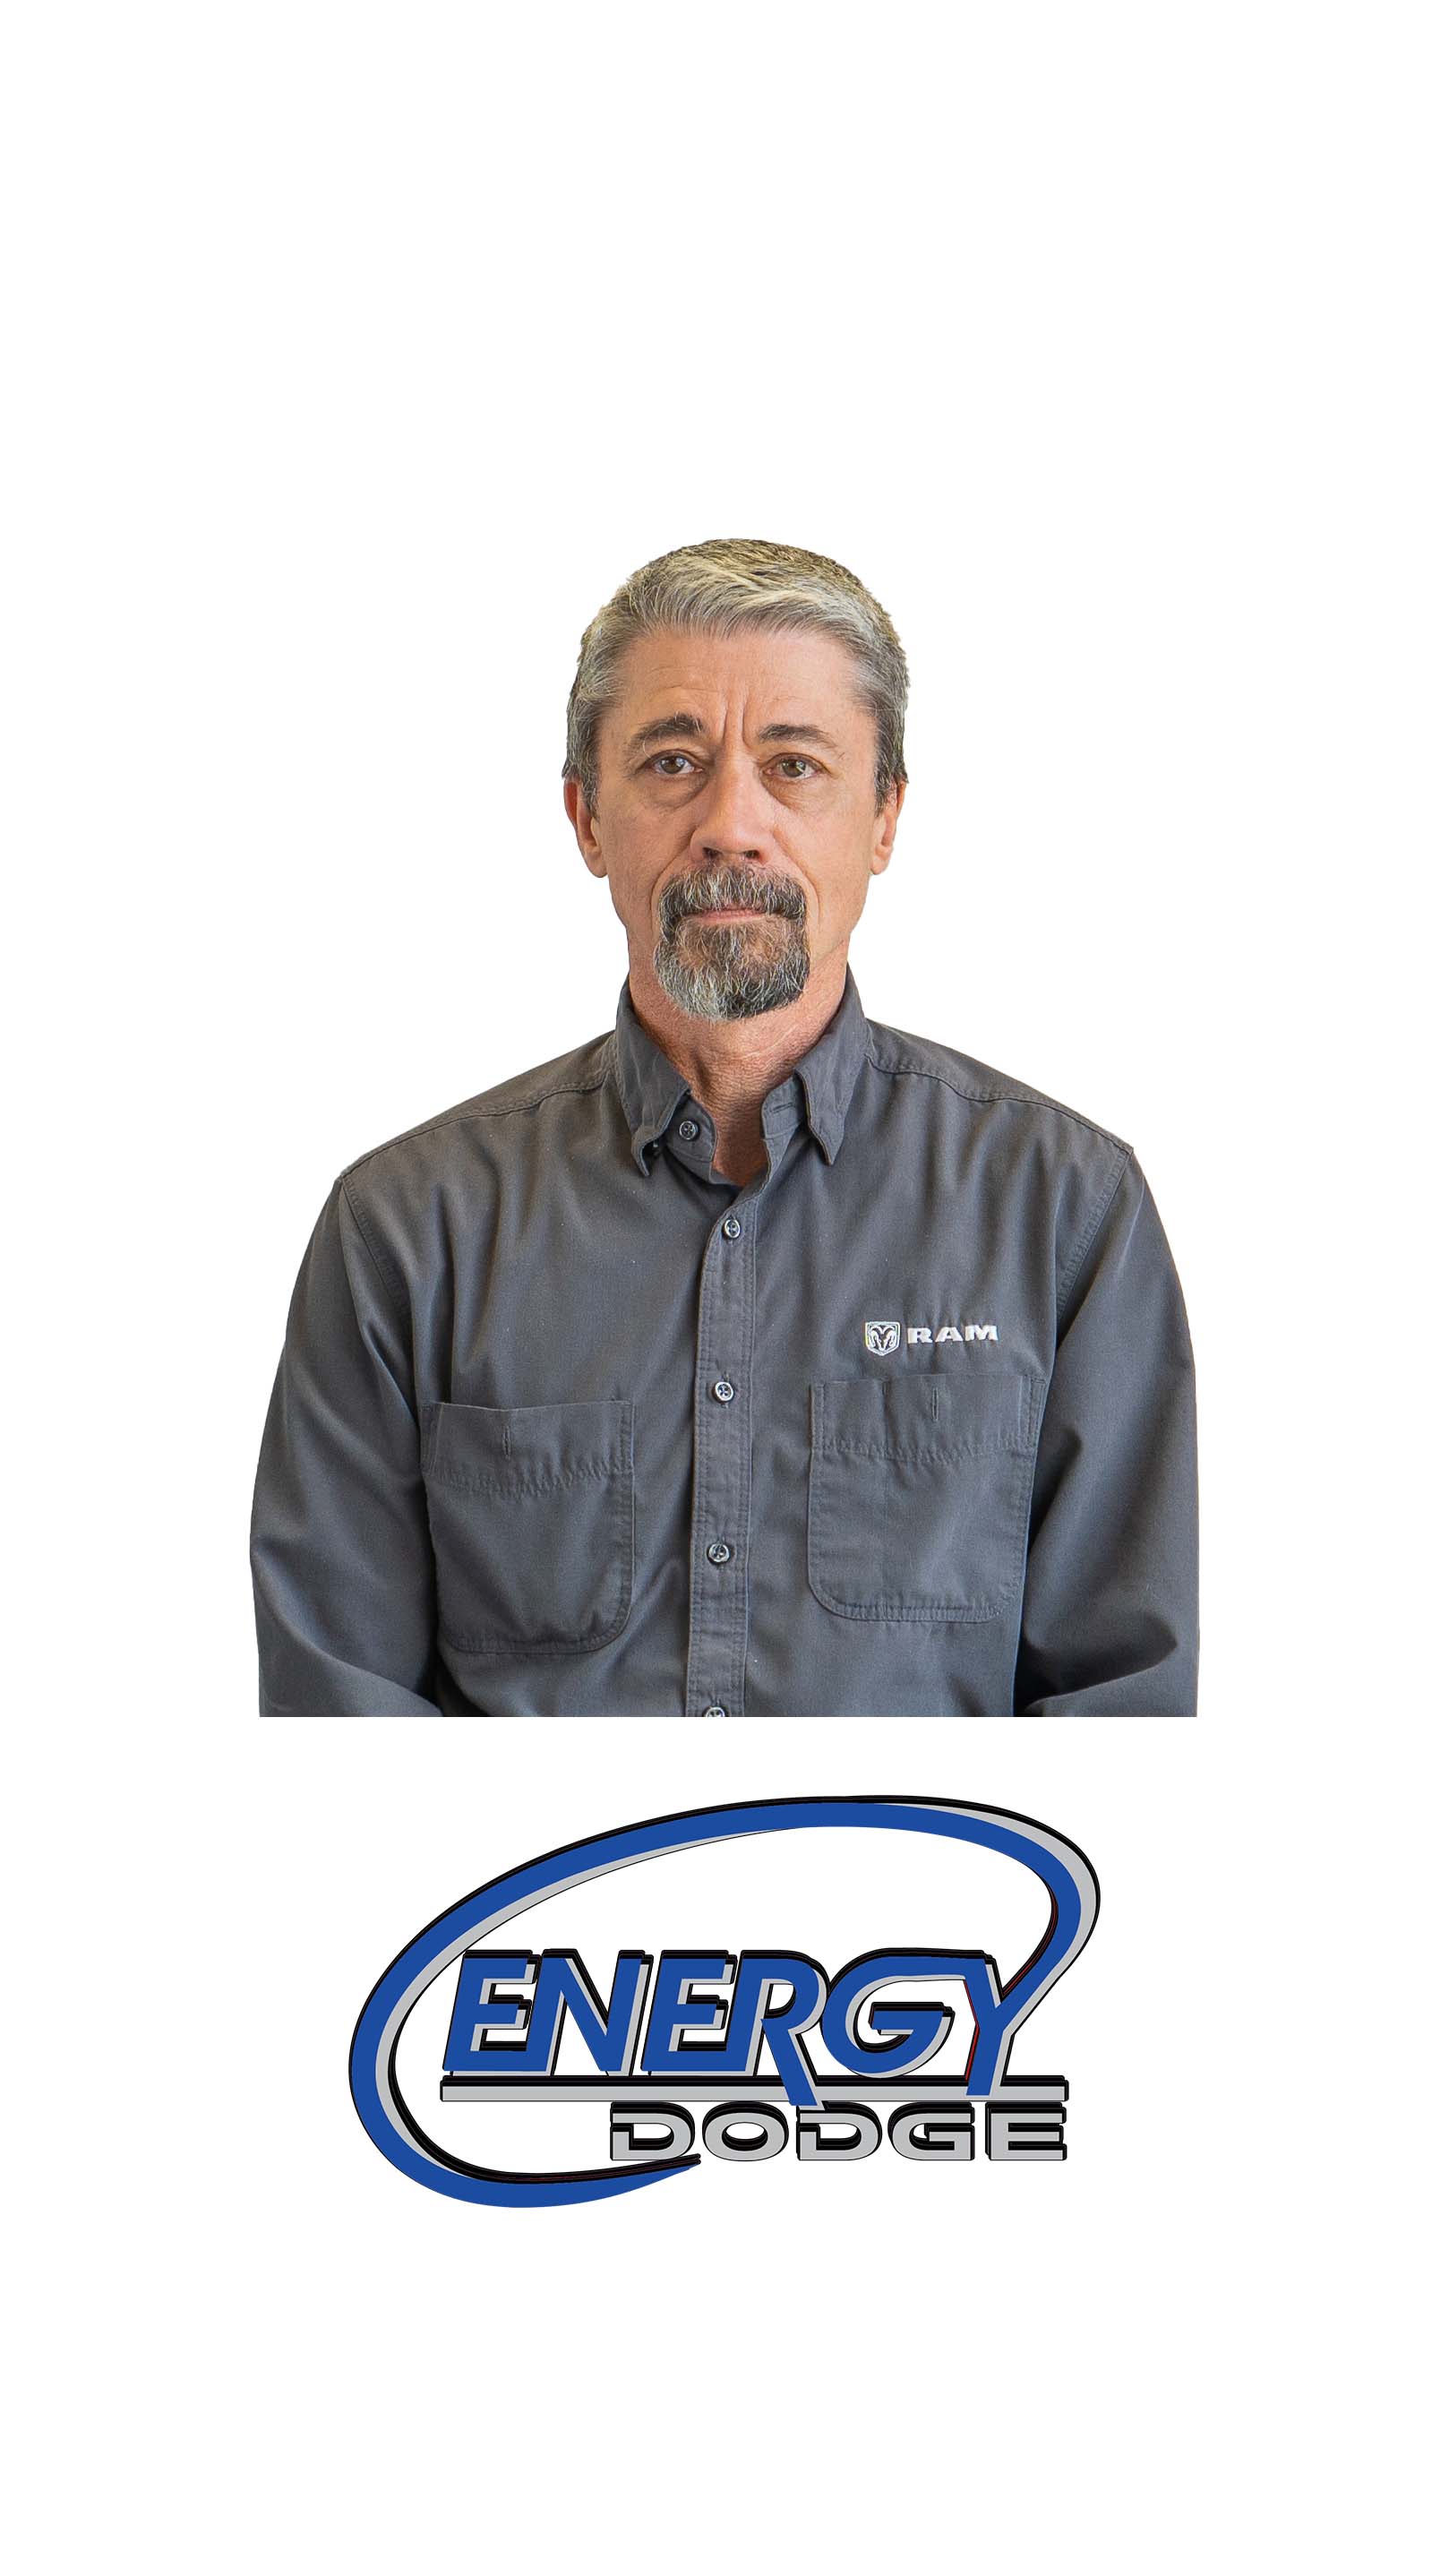 David Yaworski Fixed Operations Manager | Born in Nelson BC, entered the automotive field when he was 20. Has been in the trade for 35 years, specializing in transmission and driveline repairs.  David loves the great outdoors and spends many hours fishing, ice fishing